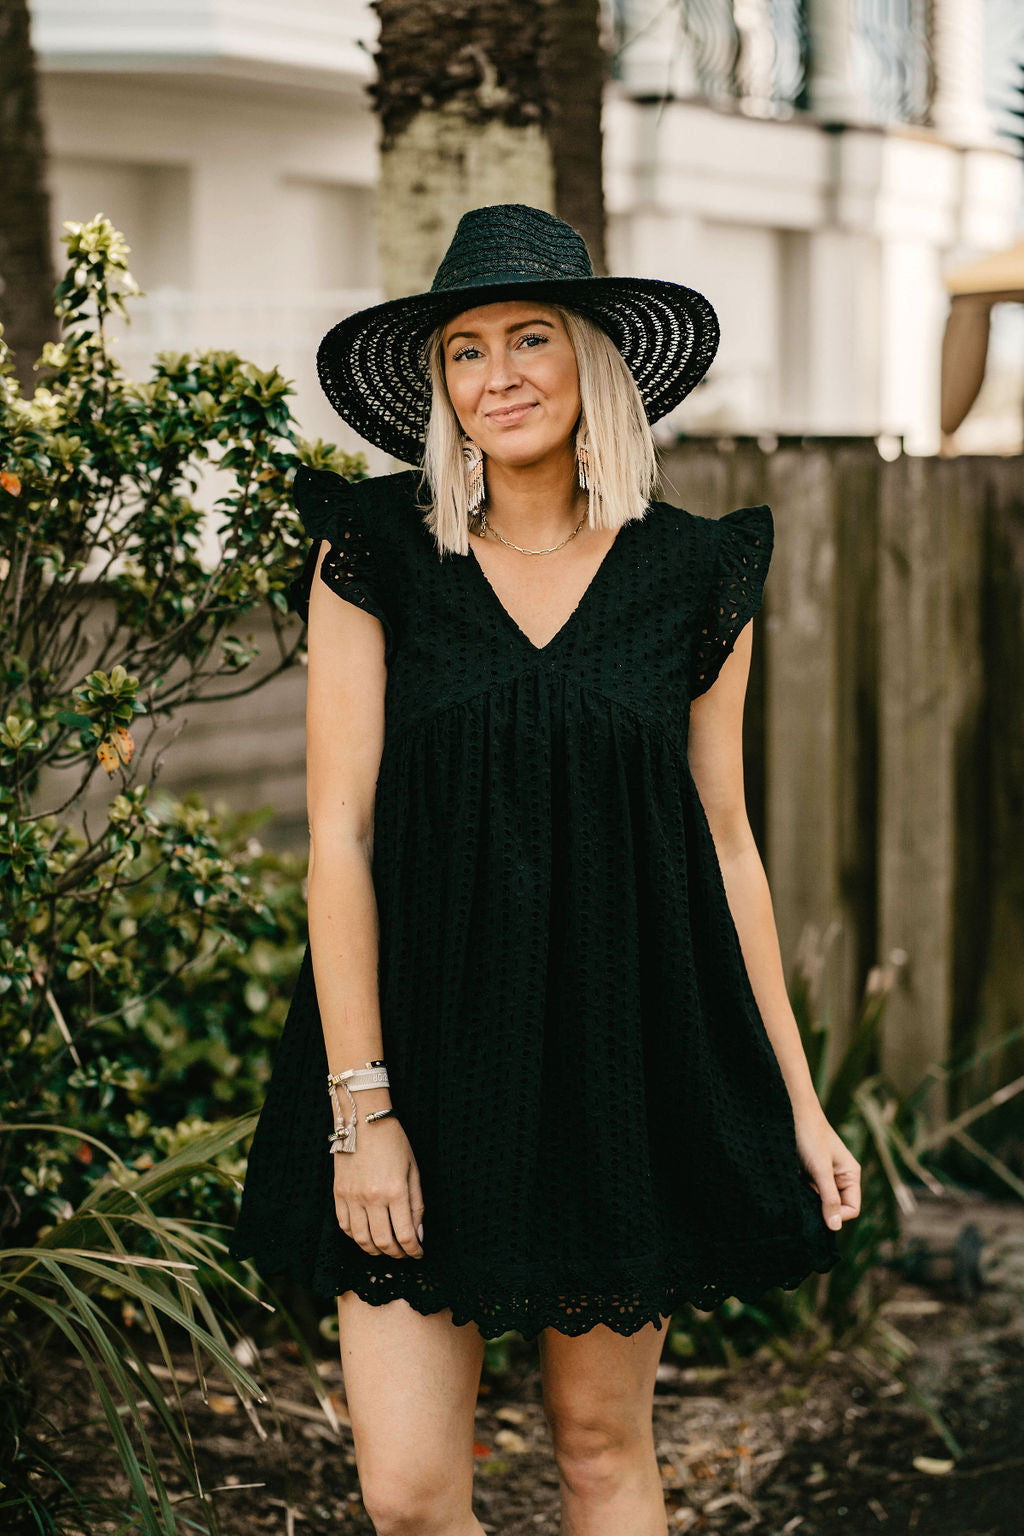 Throwing Shade Wide Brim Hat with Black Band in Black - Giddy Up Glamour Boutique